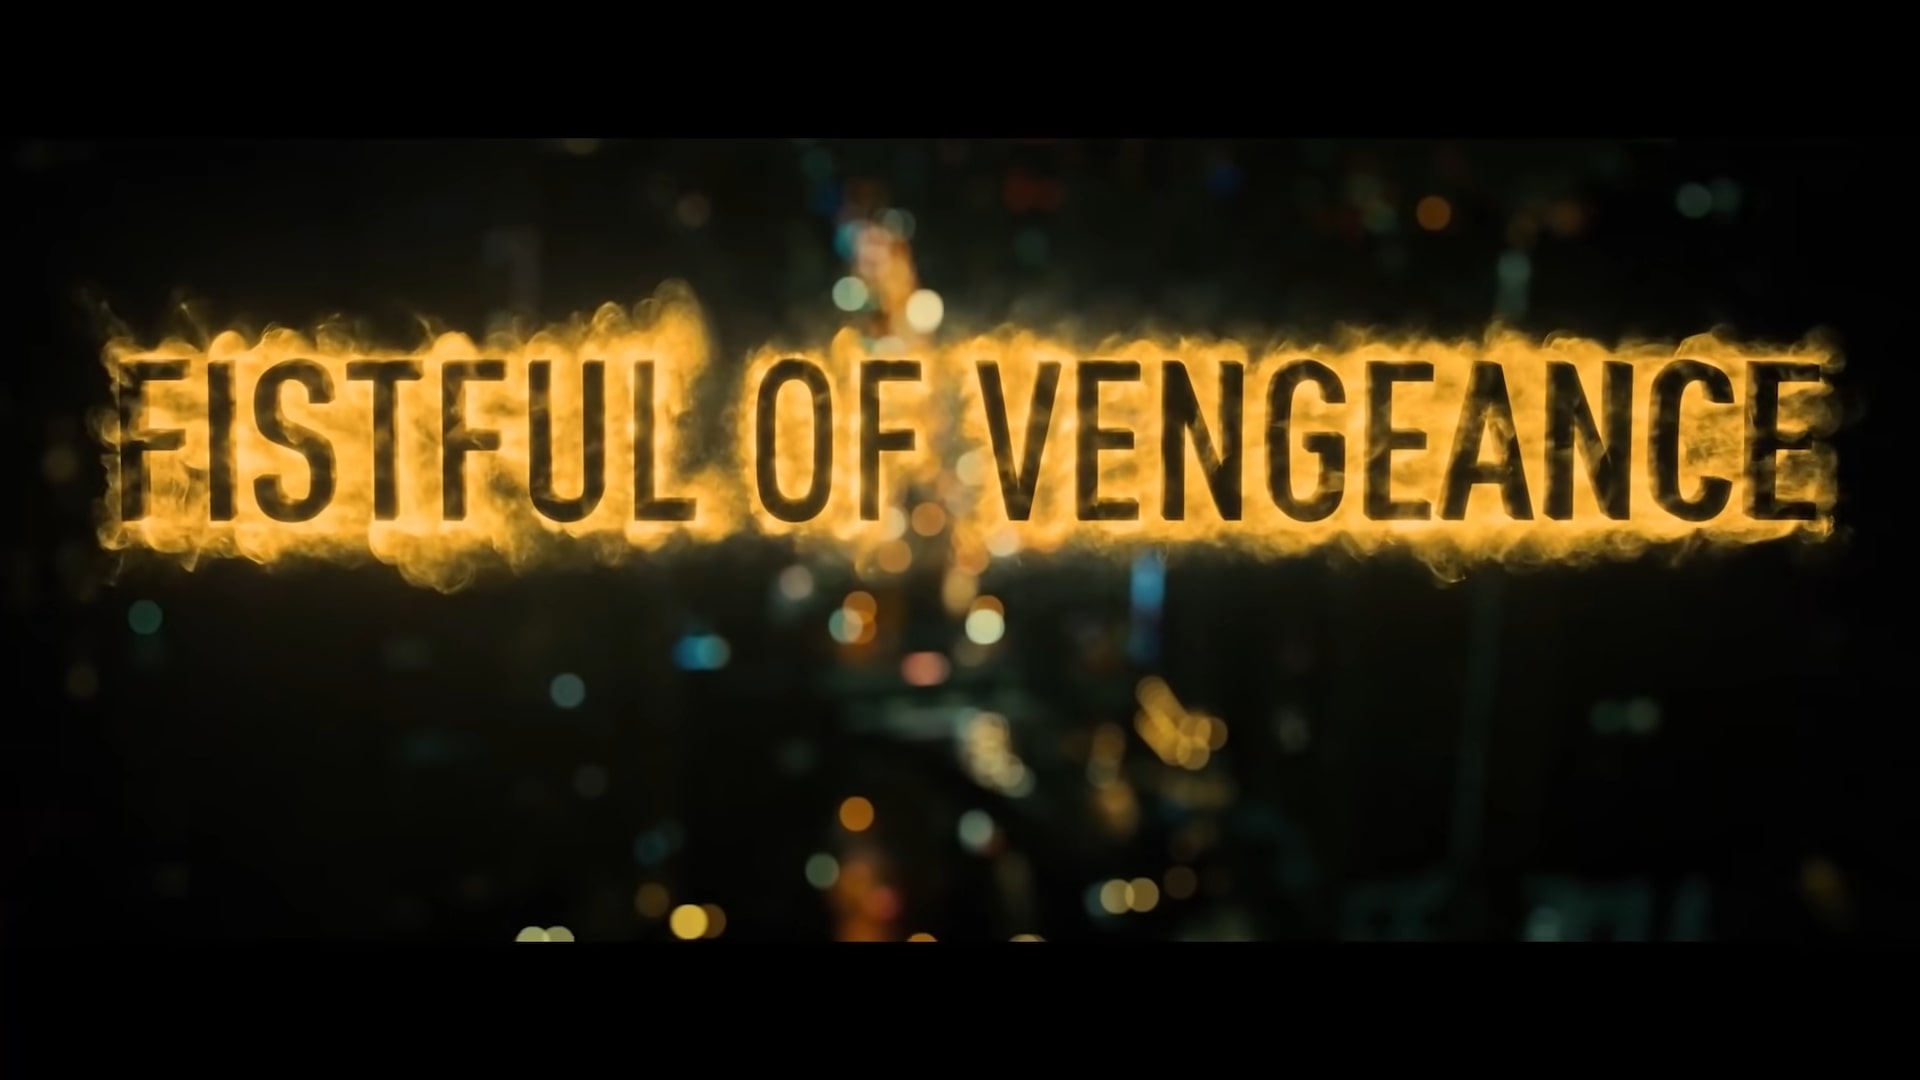 Fistful of Vengeance Trailer, Coming to Netflix in February 2022